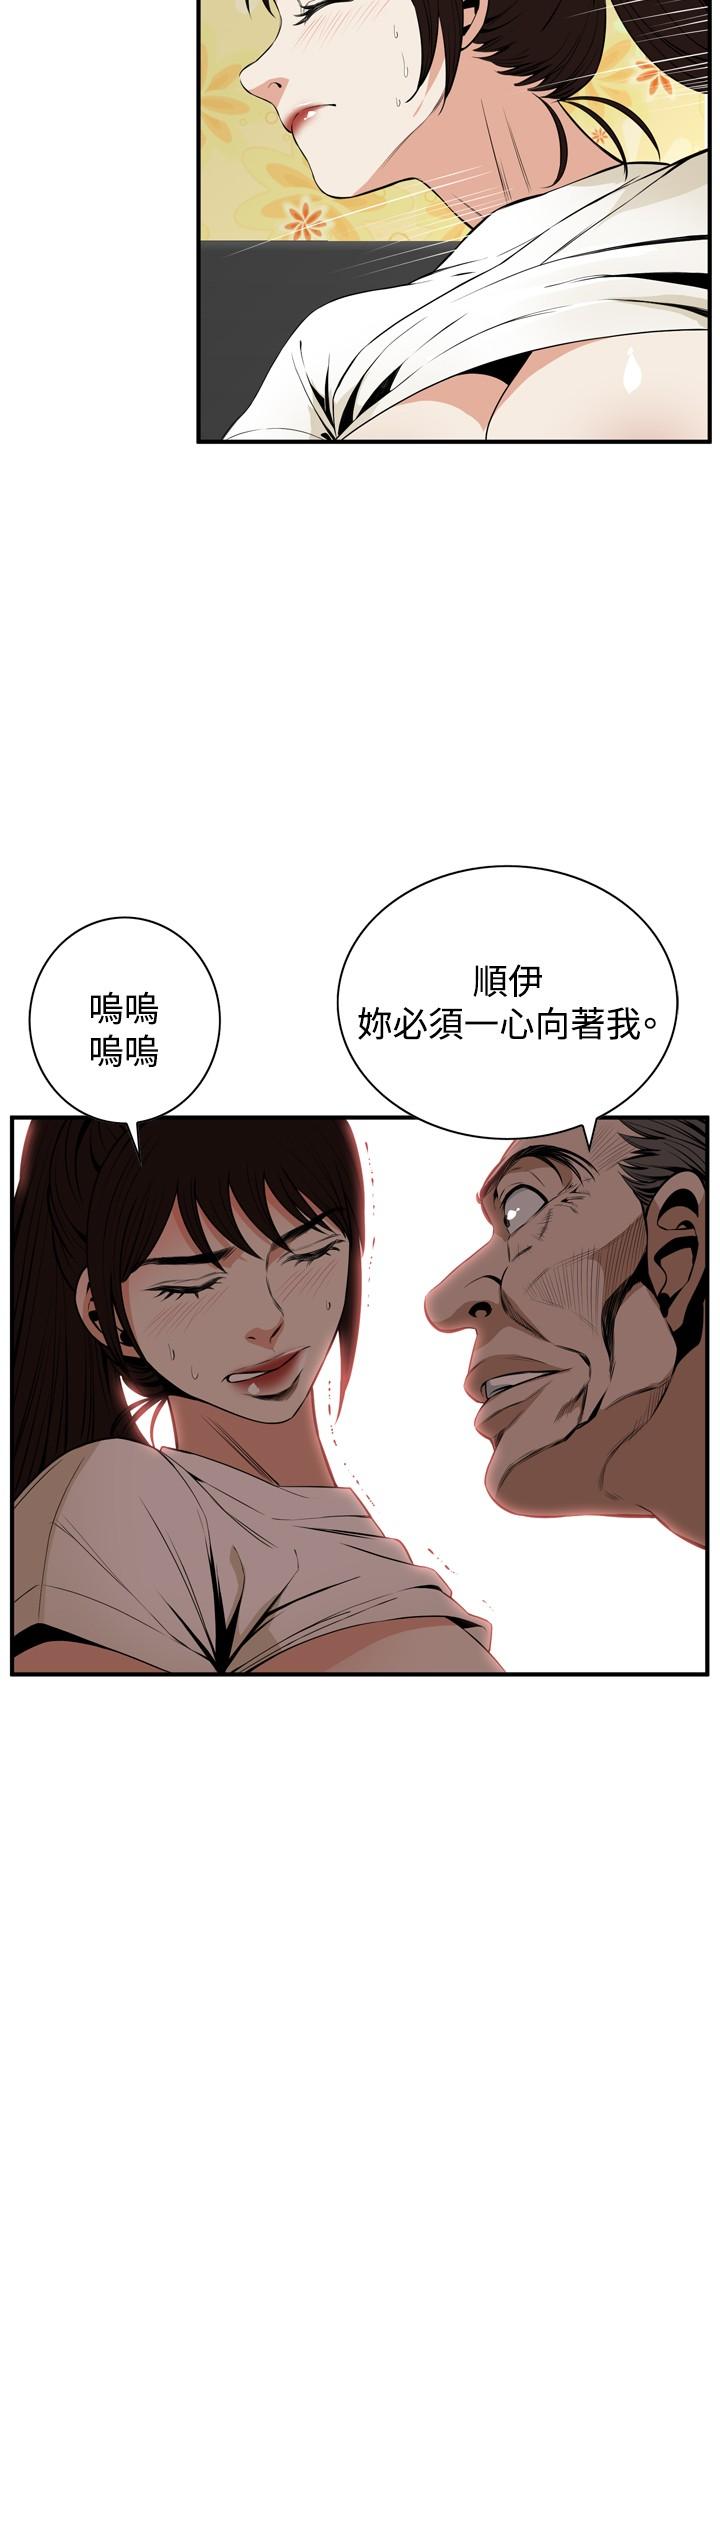 Matures Take a Peek 偷窥 Ch.39~58 [Chinese]中文 Babe - Page 10